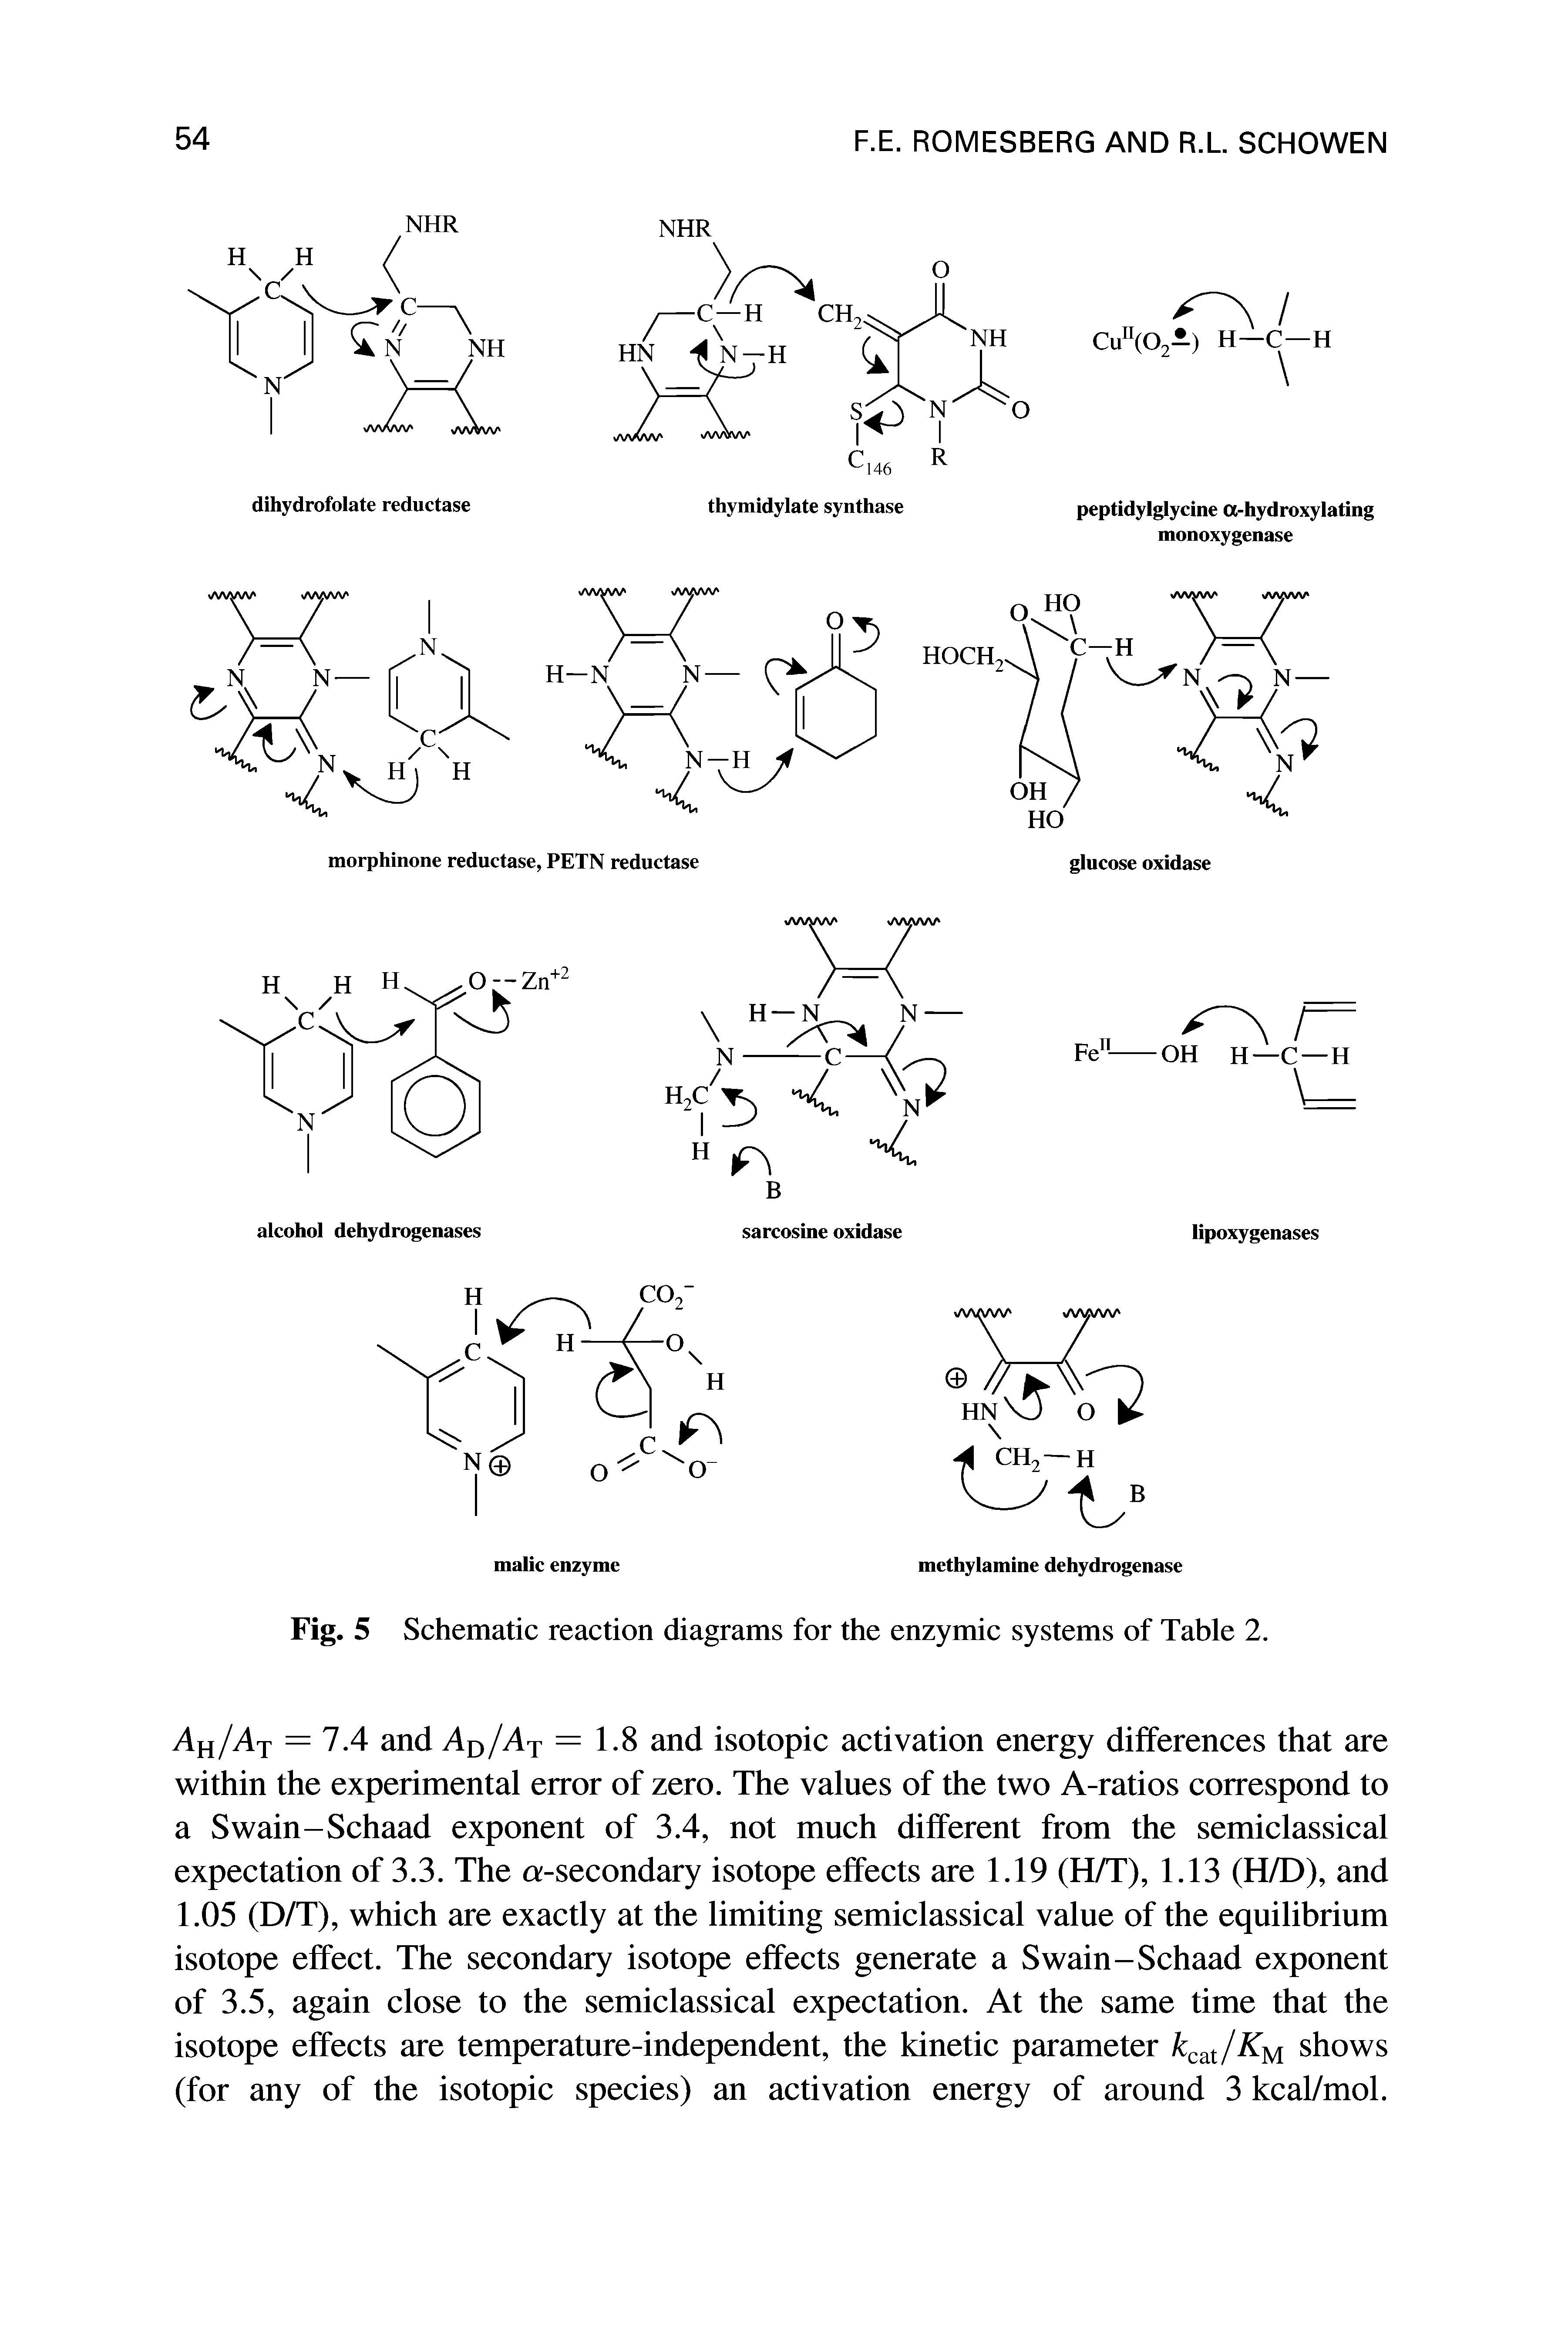 Fig. 5 Schematic reaction diagrams for the enzymic systems of Table 2.